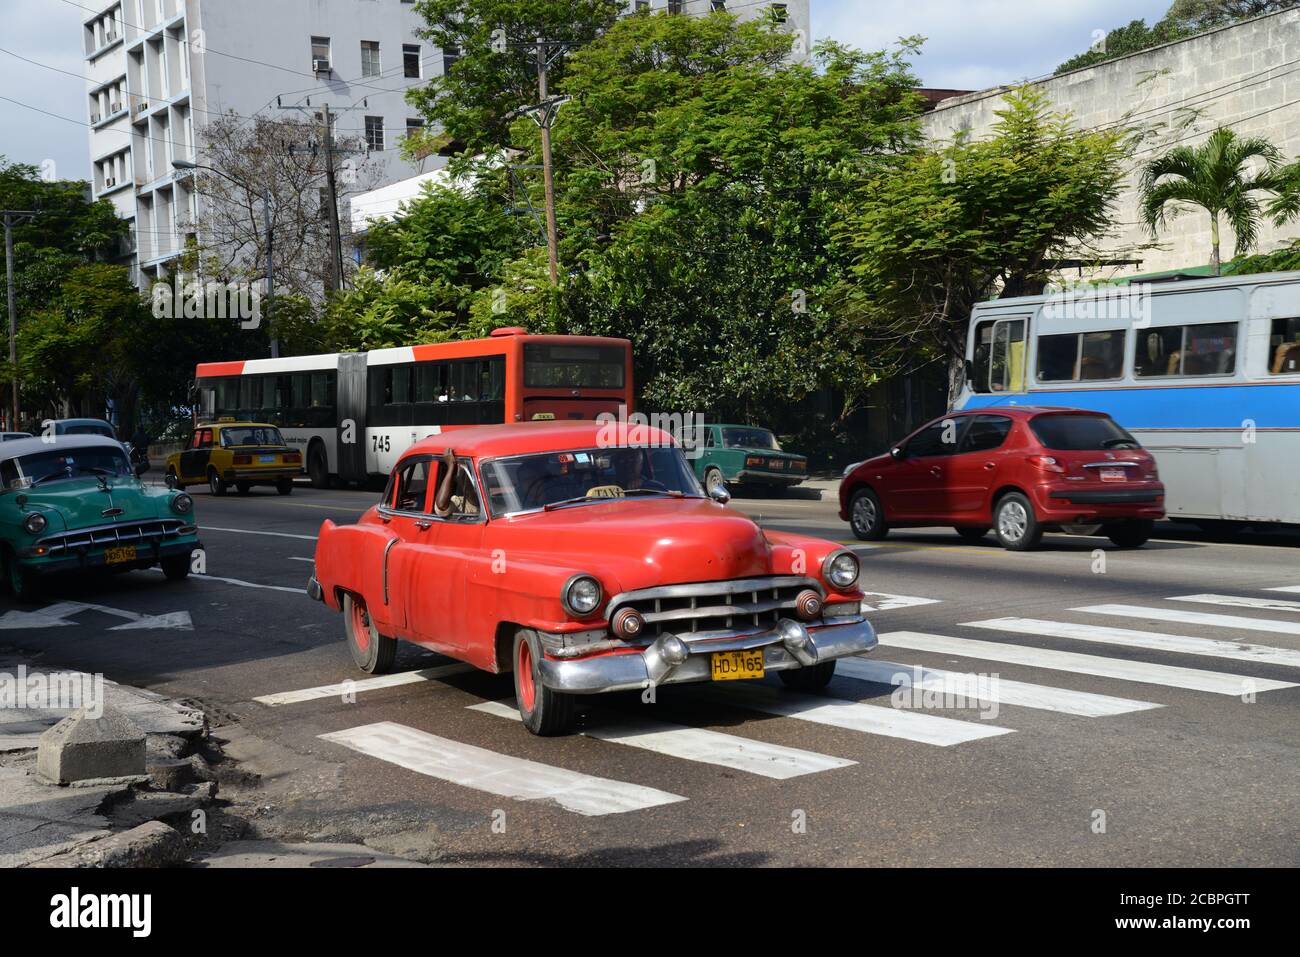 HAVANA, CUBA - Mar 07, 2013: Red American car in Havana dating from 1950s being used as taxi. This is typical of many cars still being driven in Cuba. Stock Photo